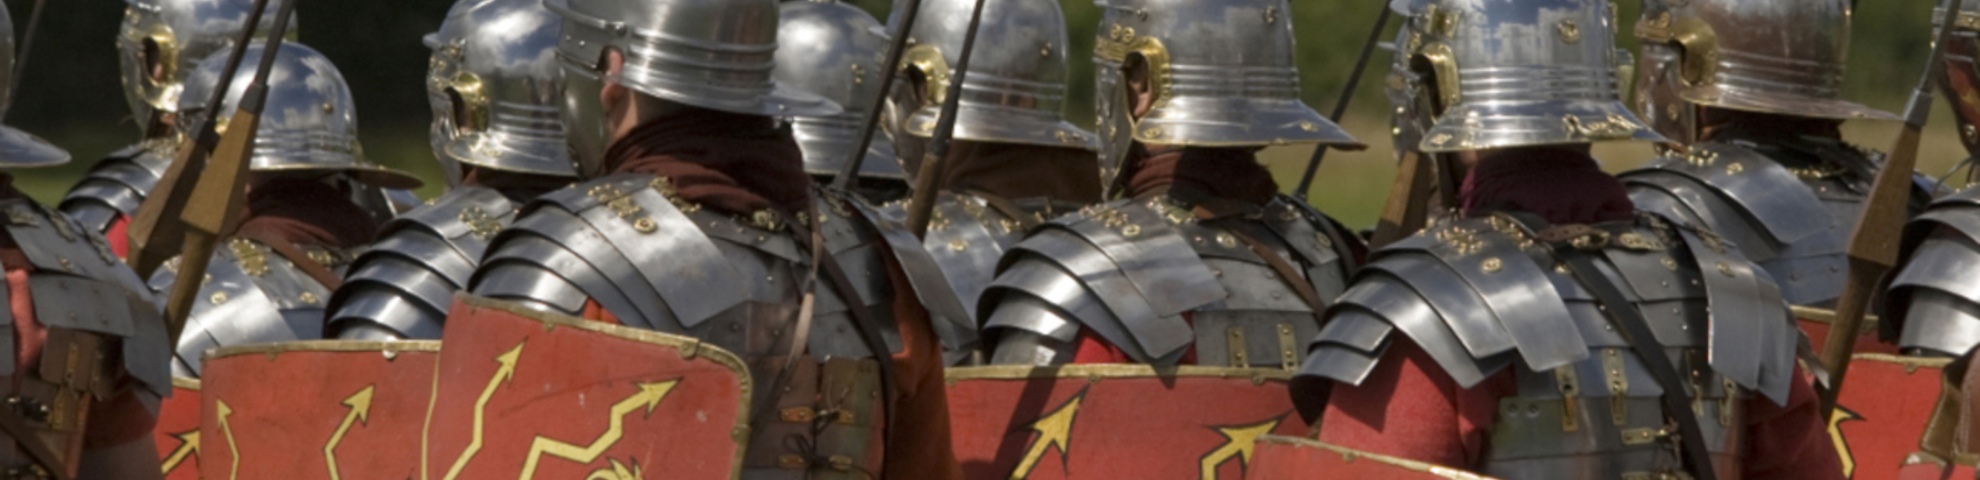 A group of people dressed as romans with helmets and red and yellow shields.